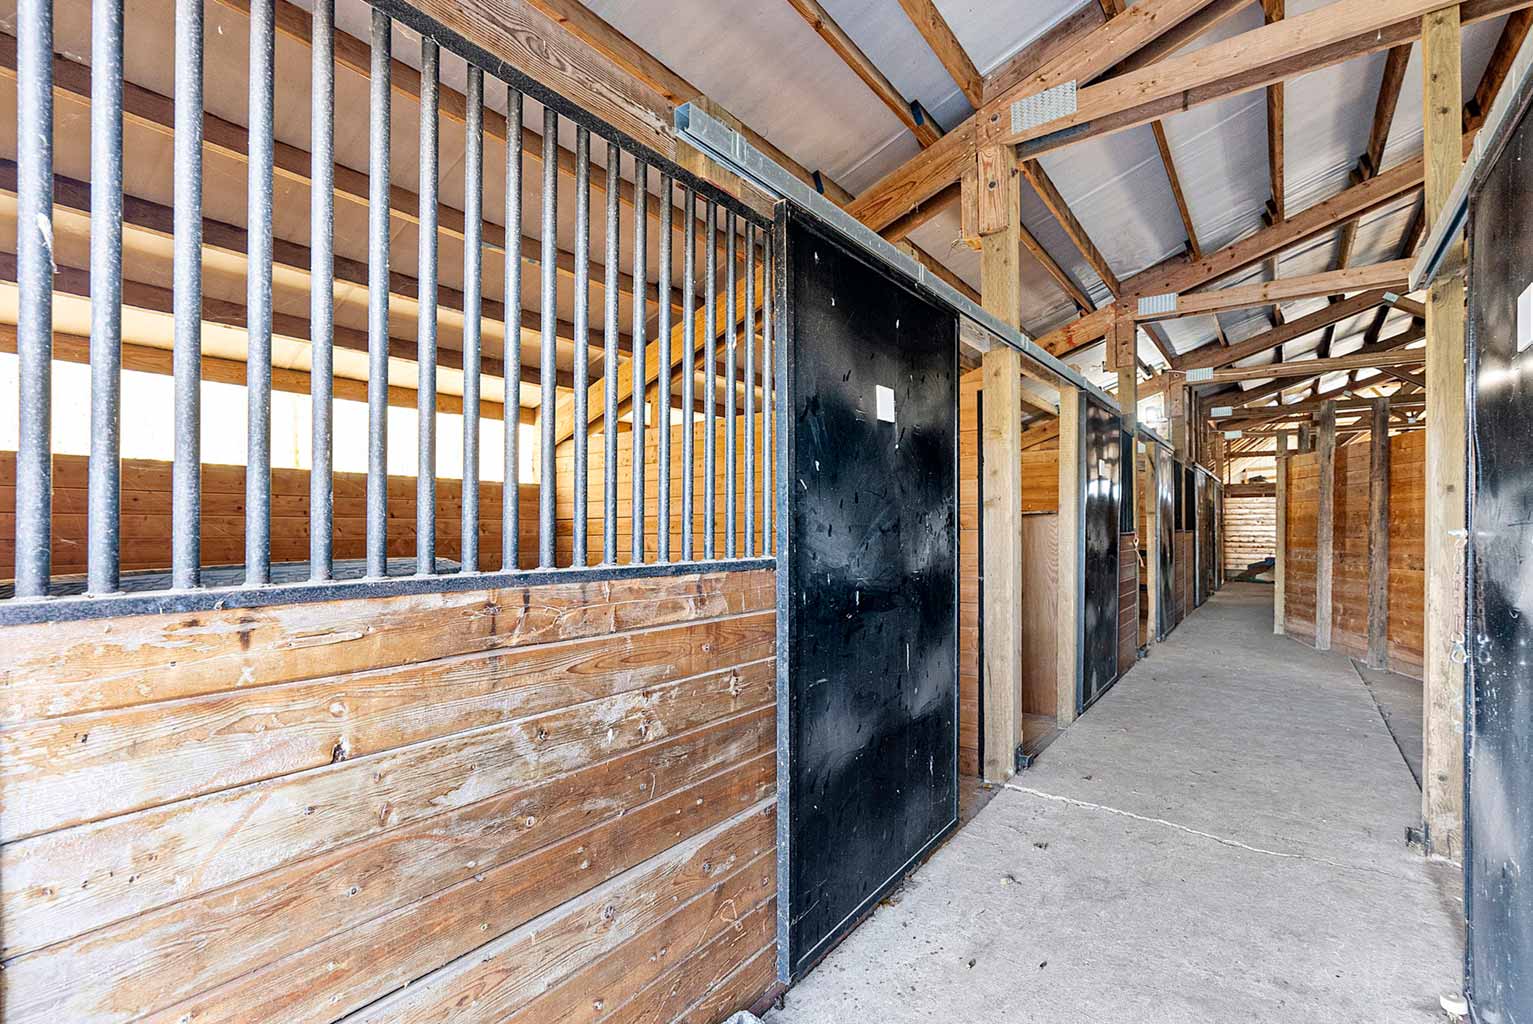 The smaller barn includes eight 12' x 12' rubber matted stalls